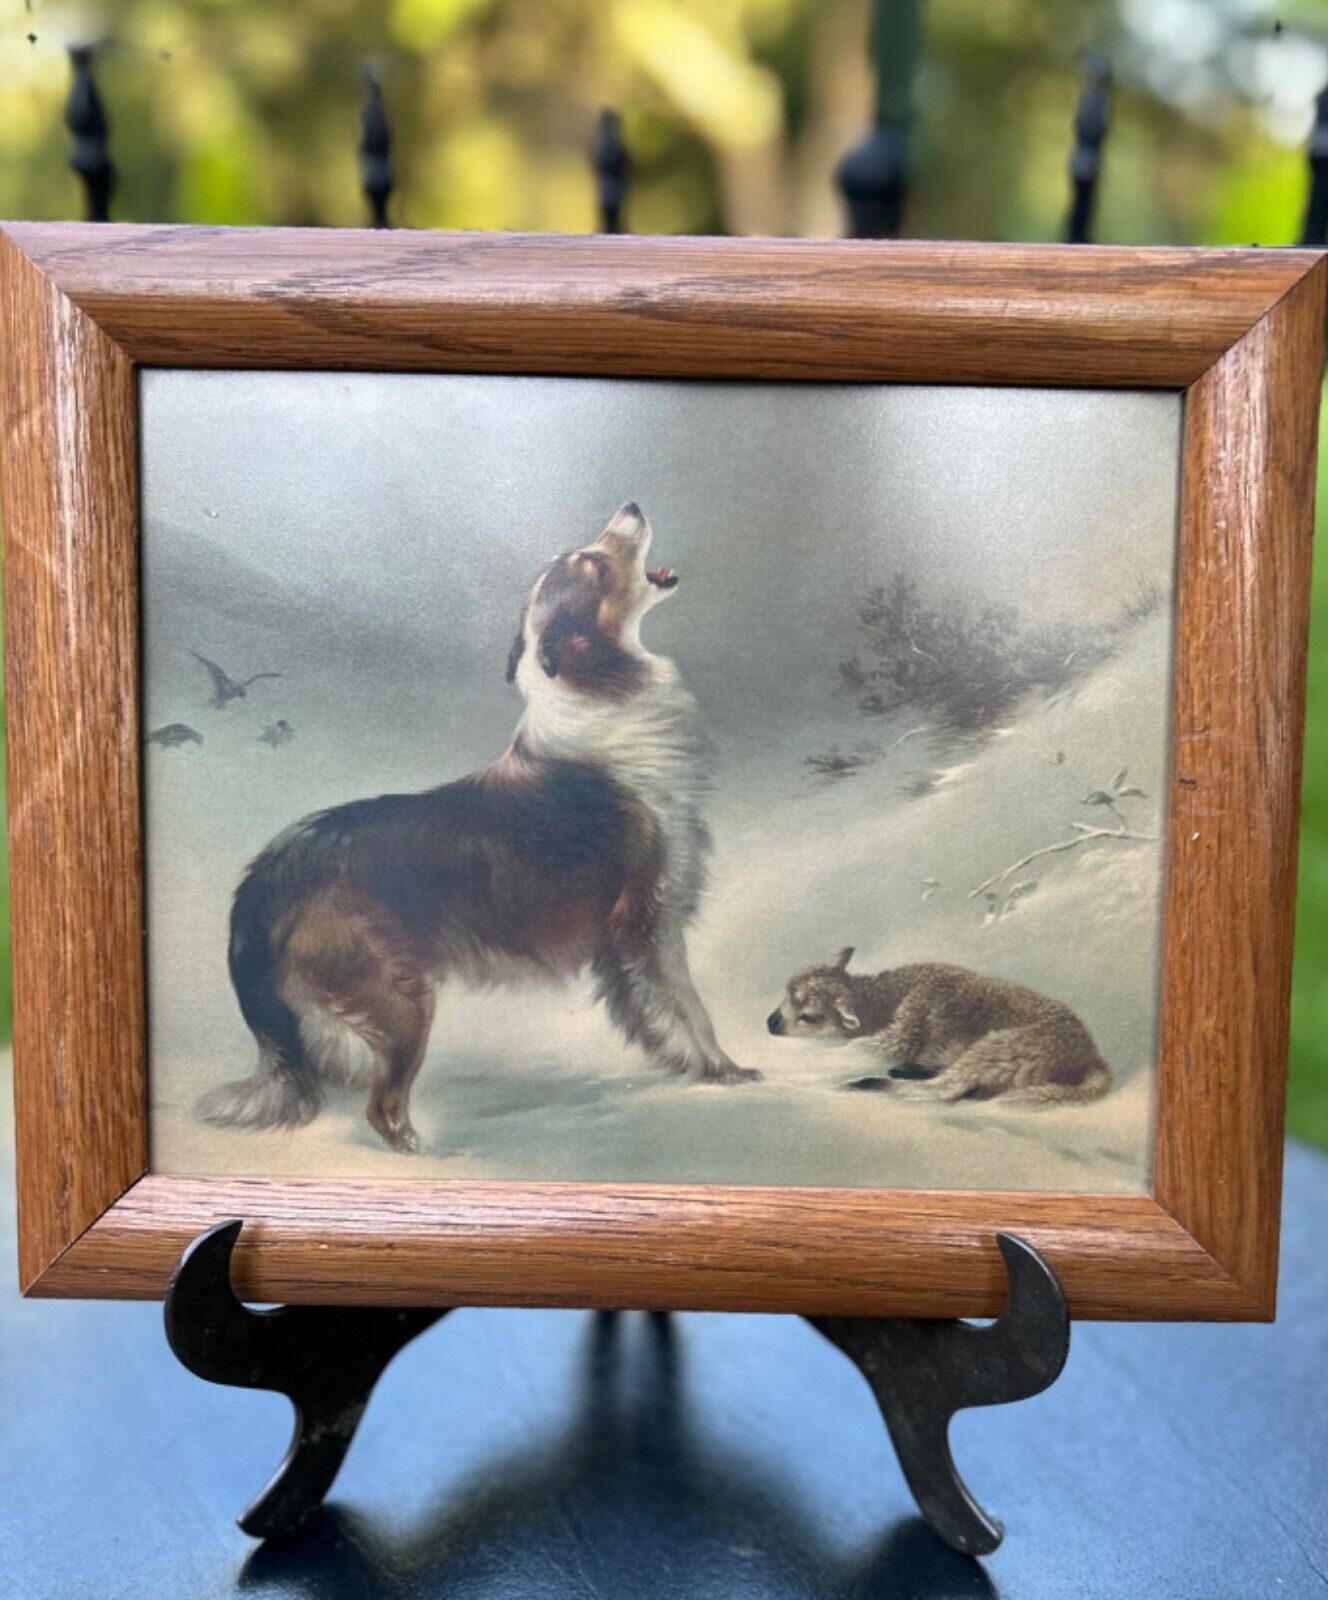 Vintage Collie and Lamb “FOUND” Lithograph Print Howling Dog Oak Framed 12x10”